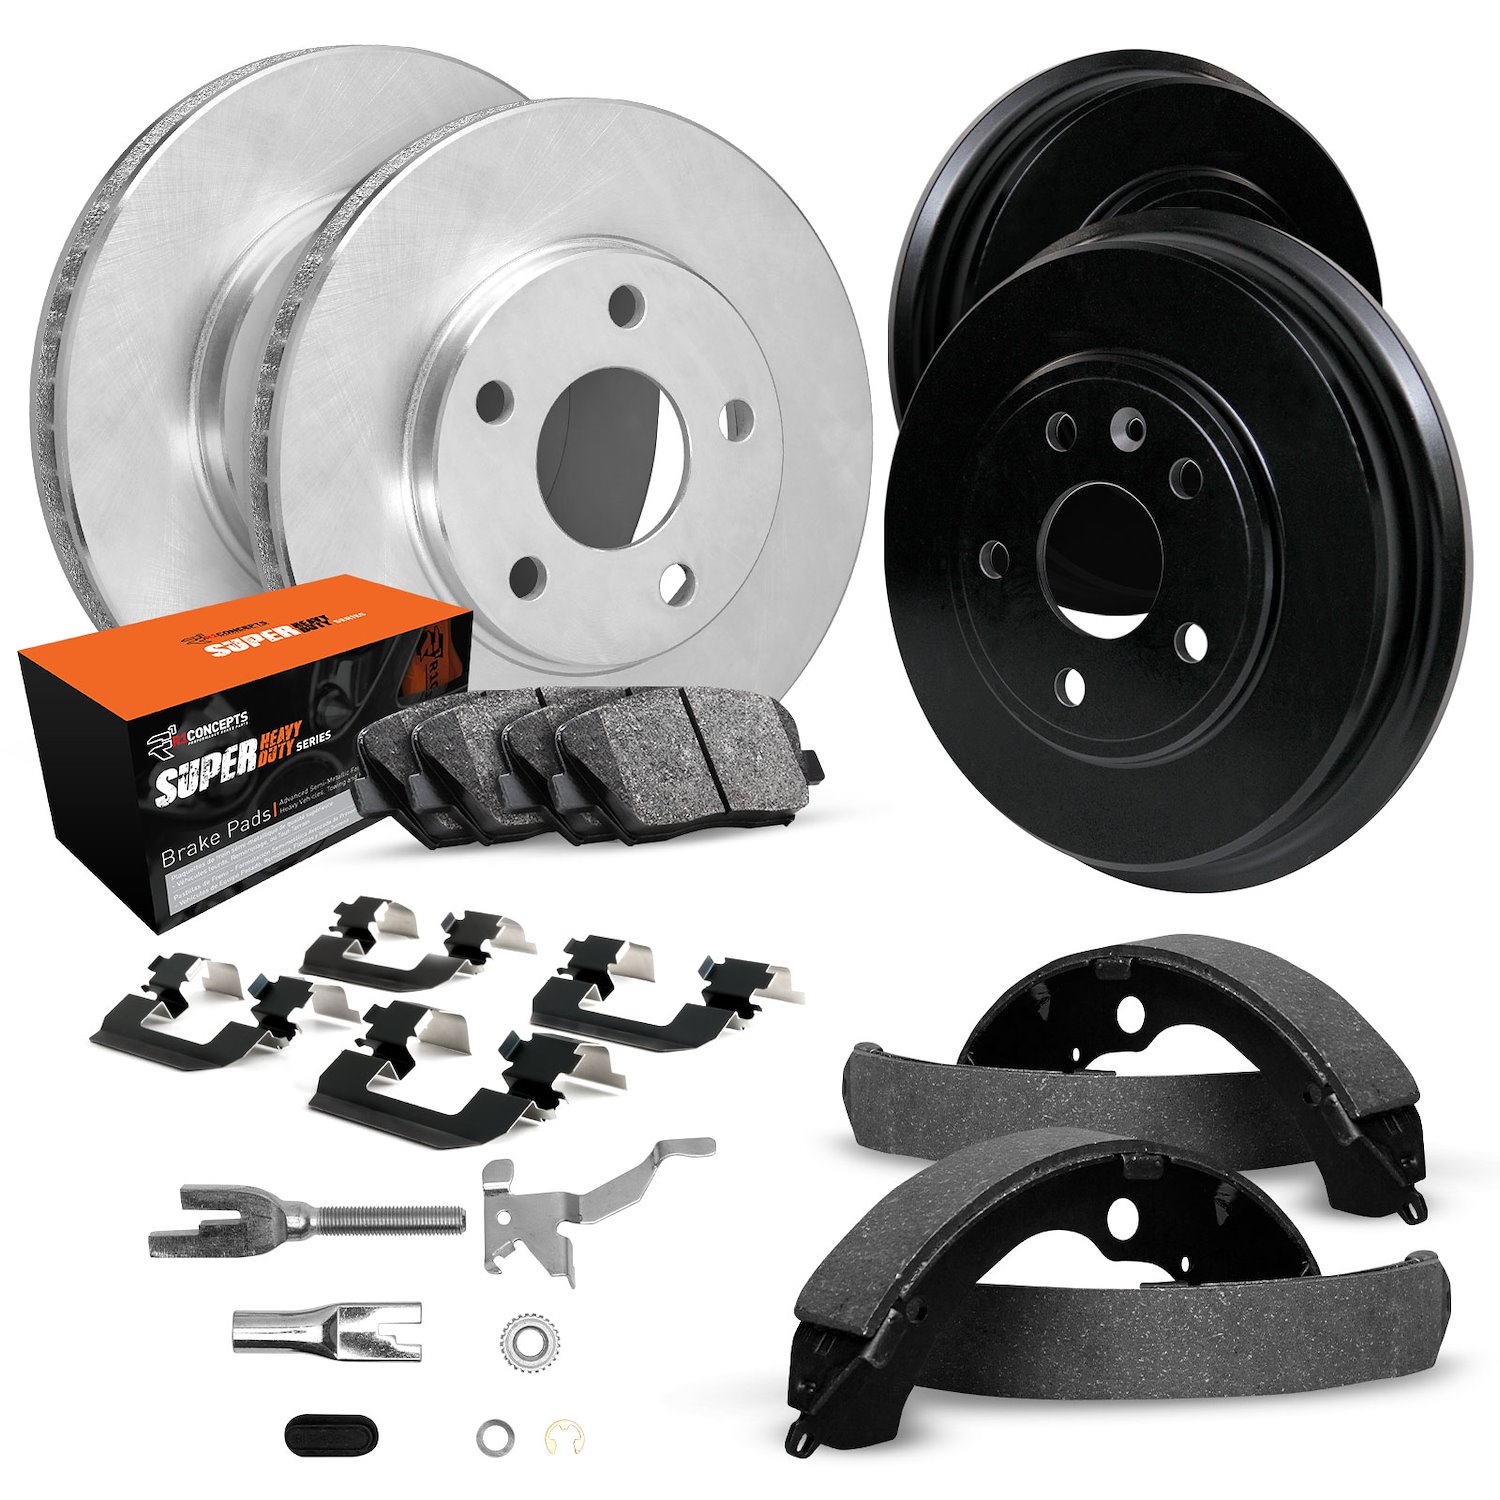 E-Line Blank Brake Rotor & Drum Set w/Super-Duty Pads, Shoes, Hardware, & Adjusters, 1972-1972 Ford/Lincoln/Mercury/Mazda